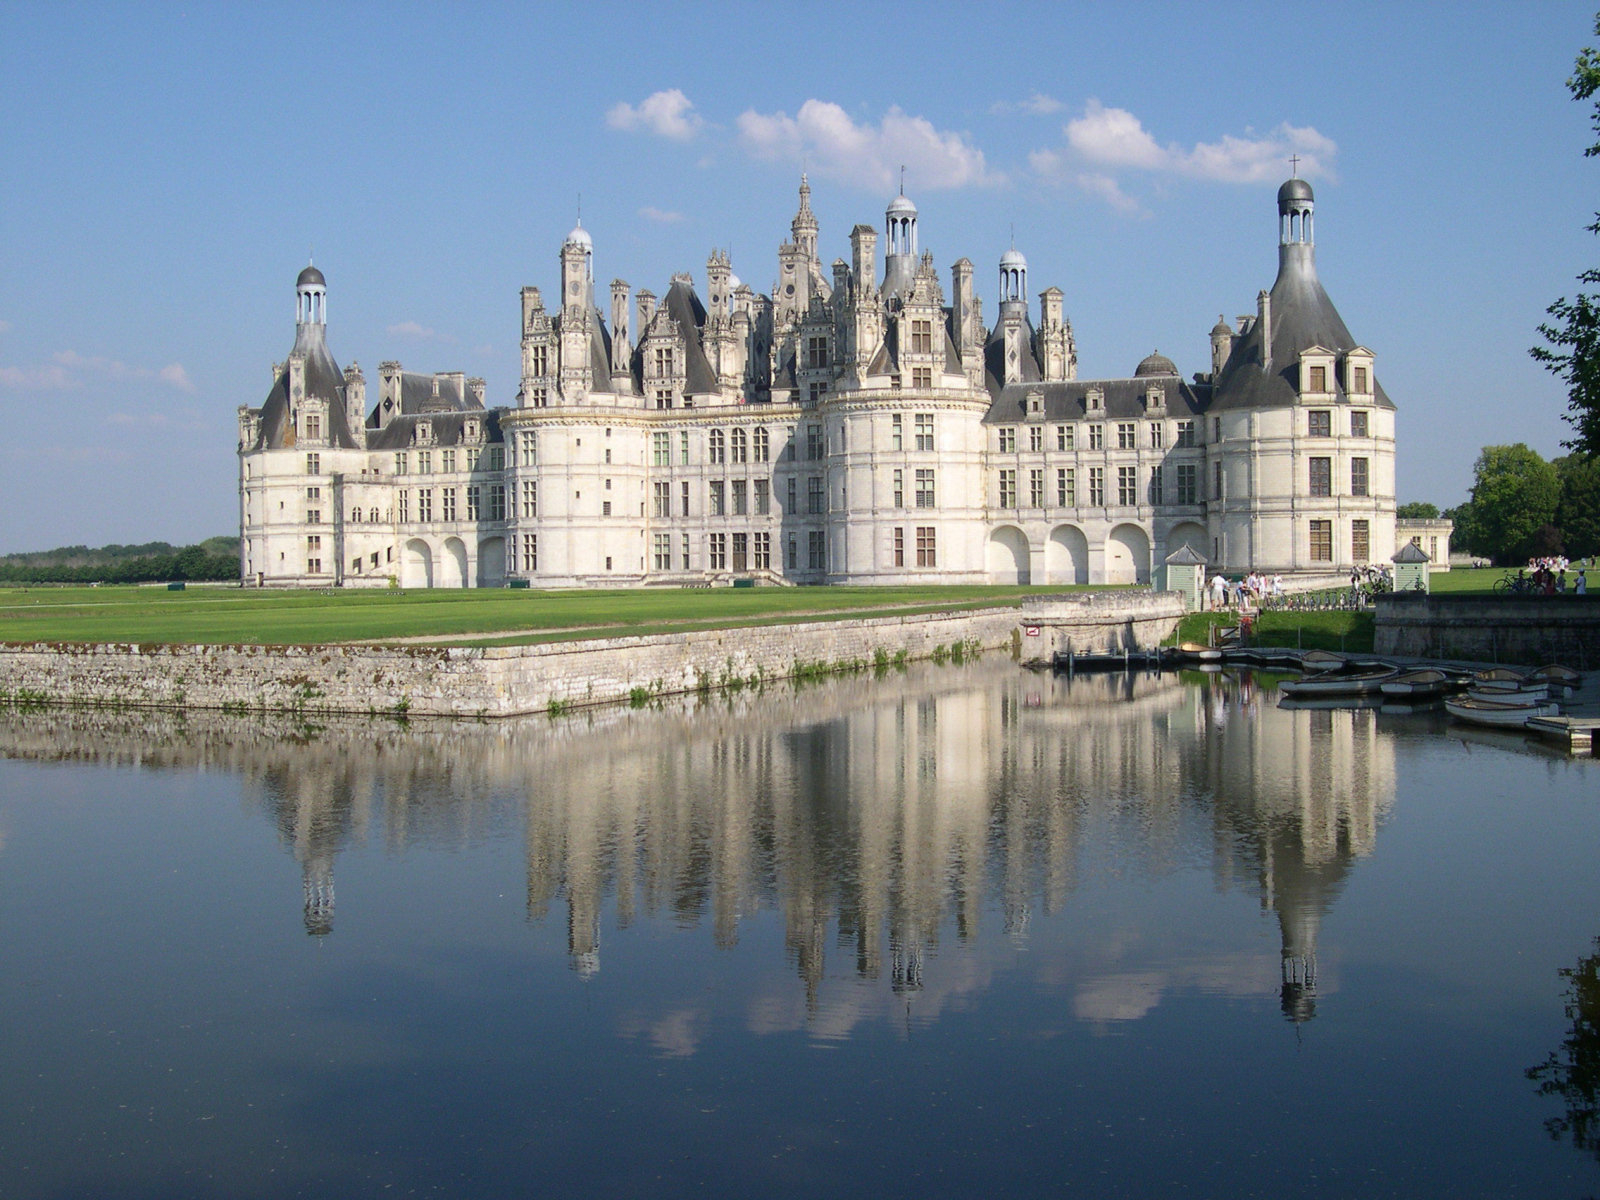 Lake front of the castle in the Loire, France